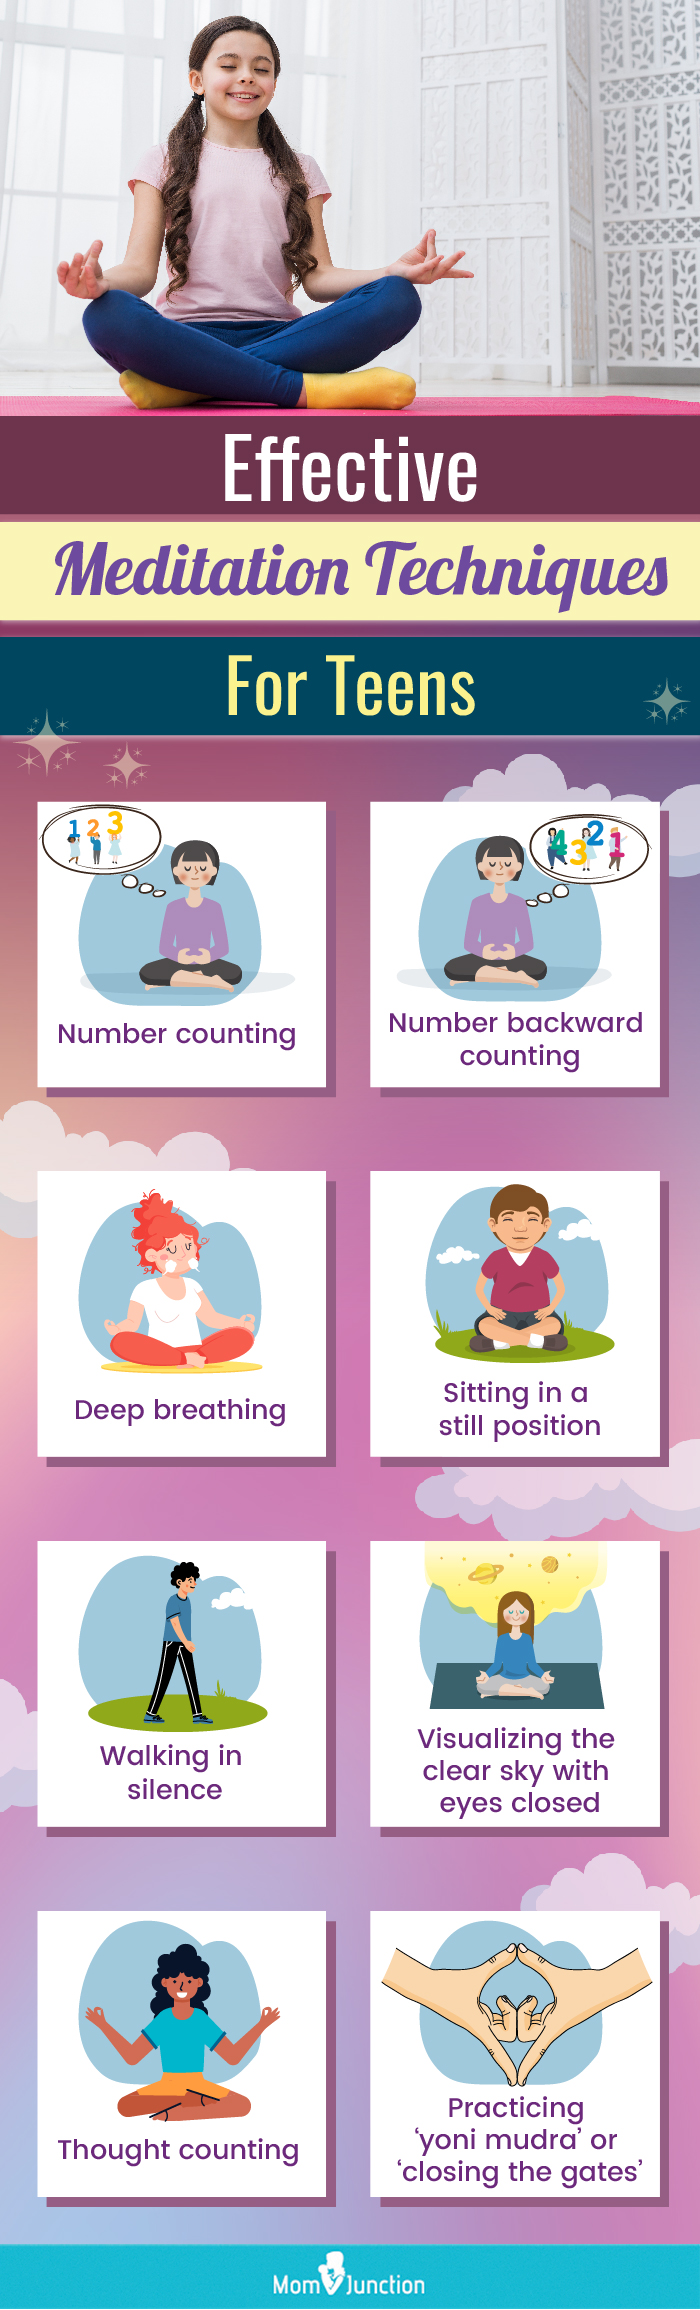 effective meditation techniques for teens (infographic)